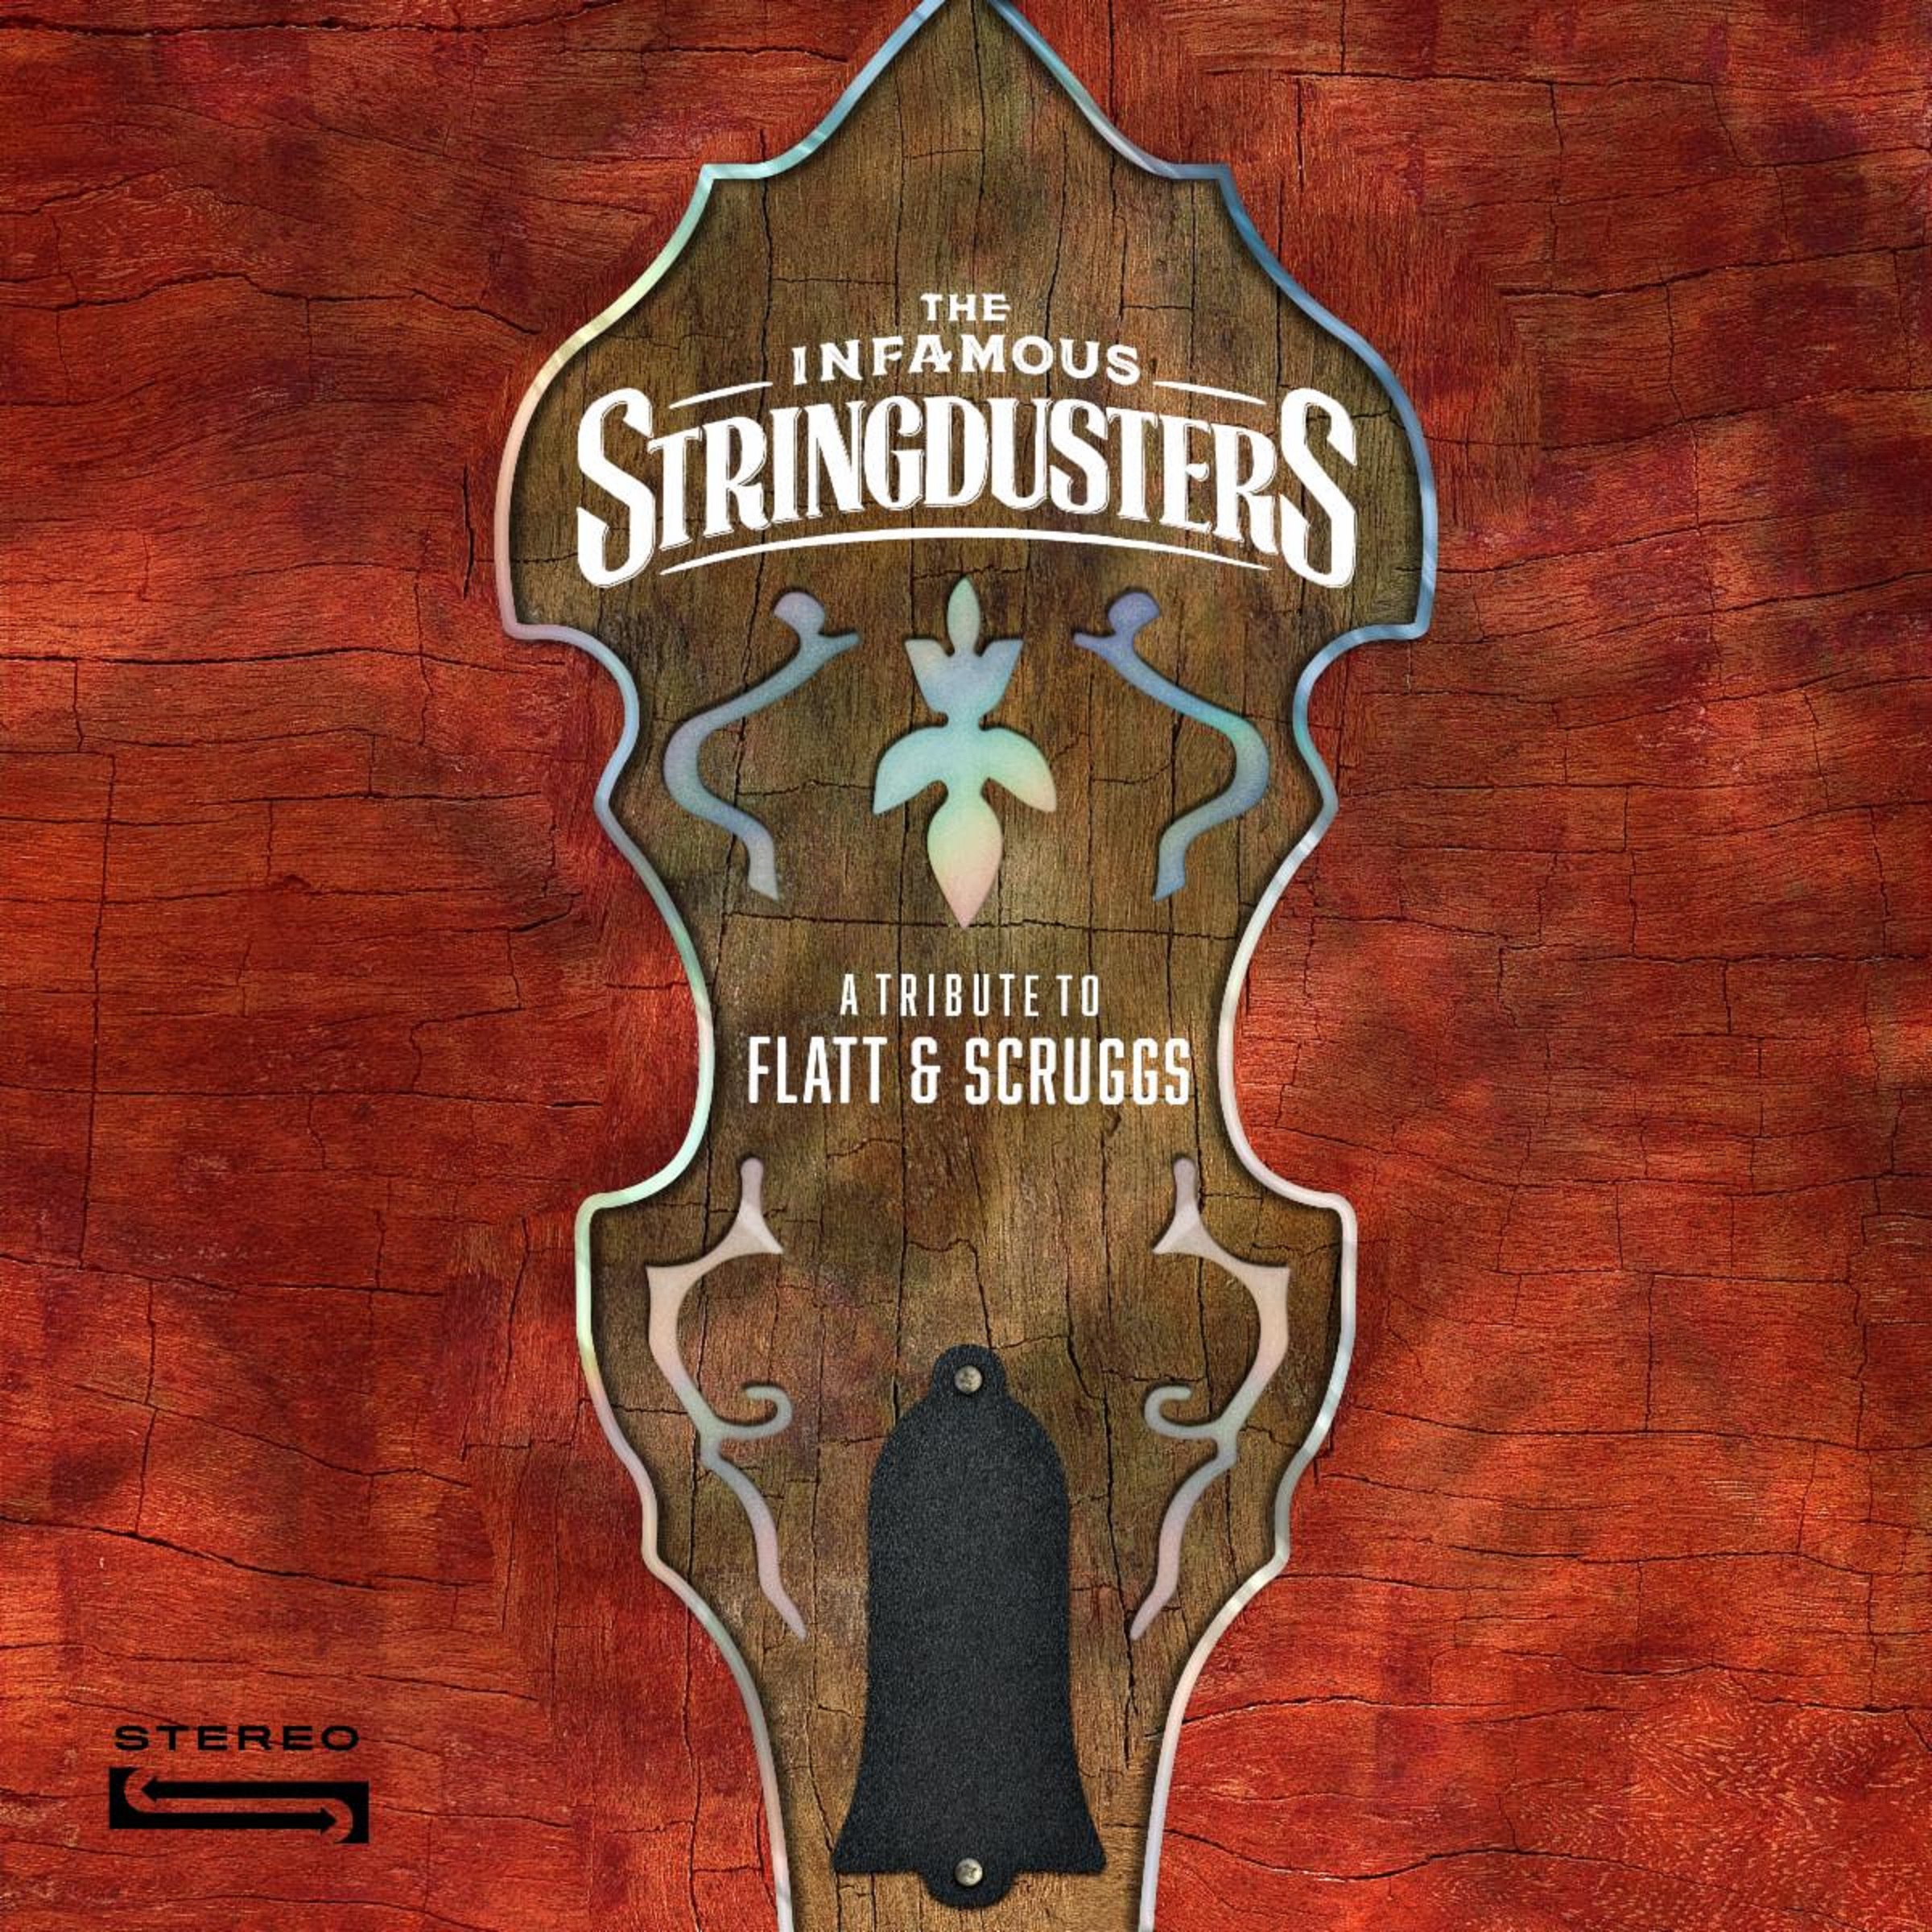 The Infamous Stringdusters Honor More Of Their Heroes With New Album "A Tribute To Flatt & Scruggs"